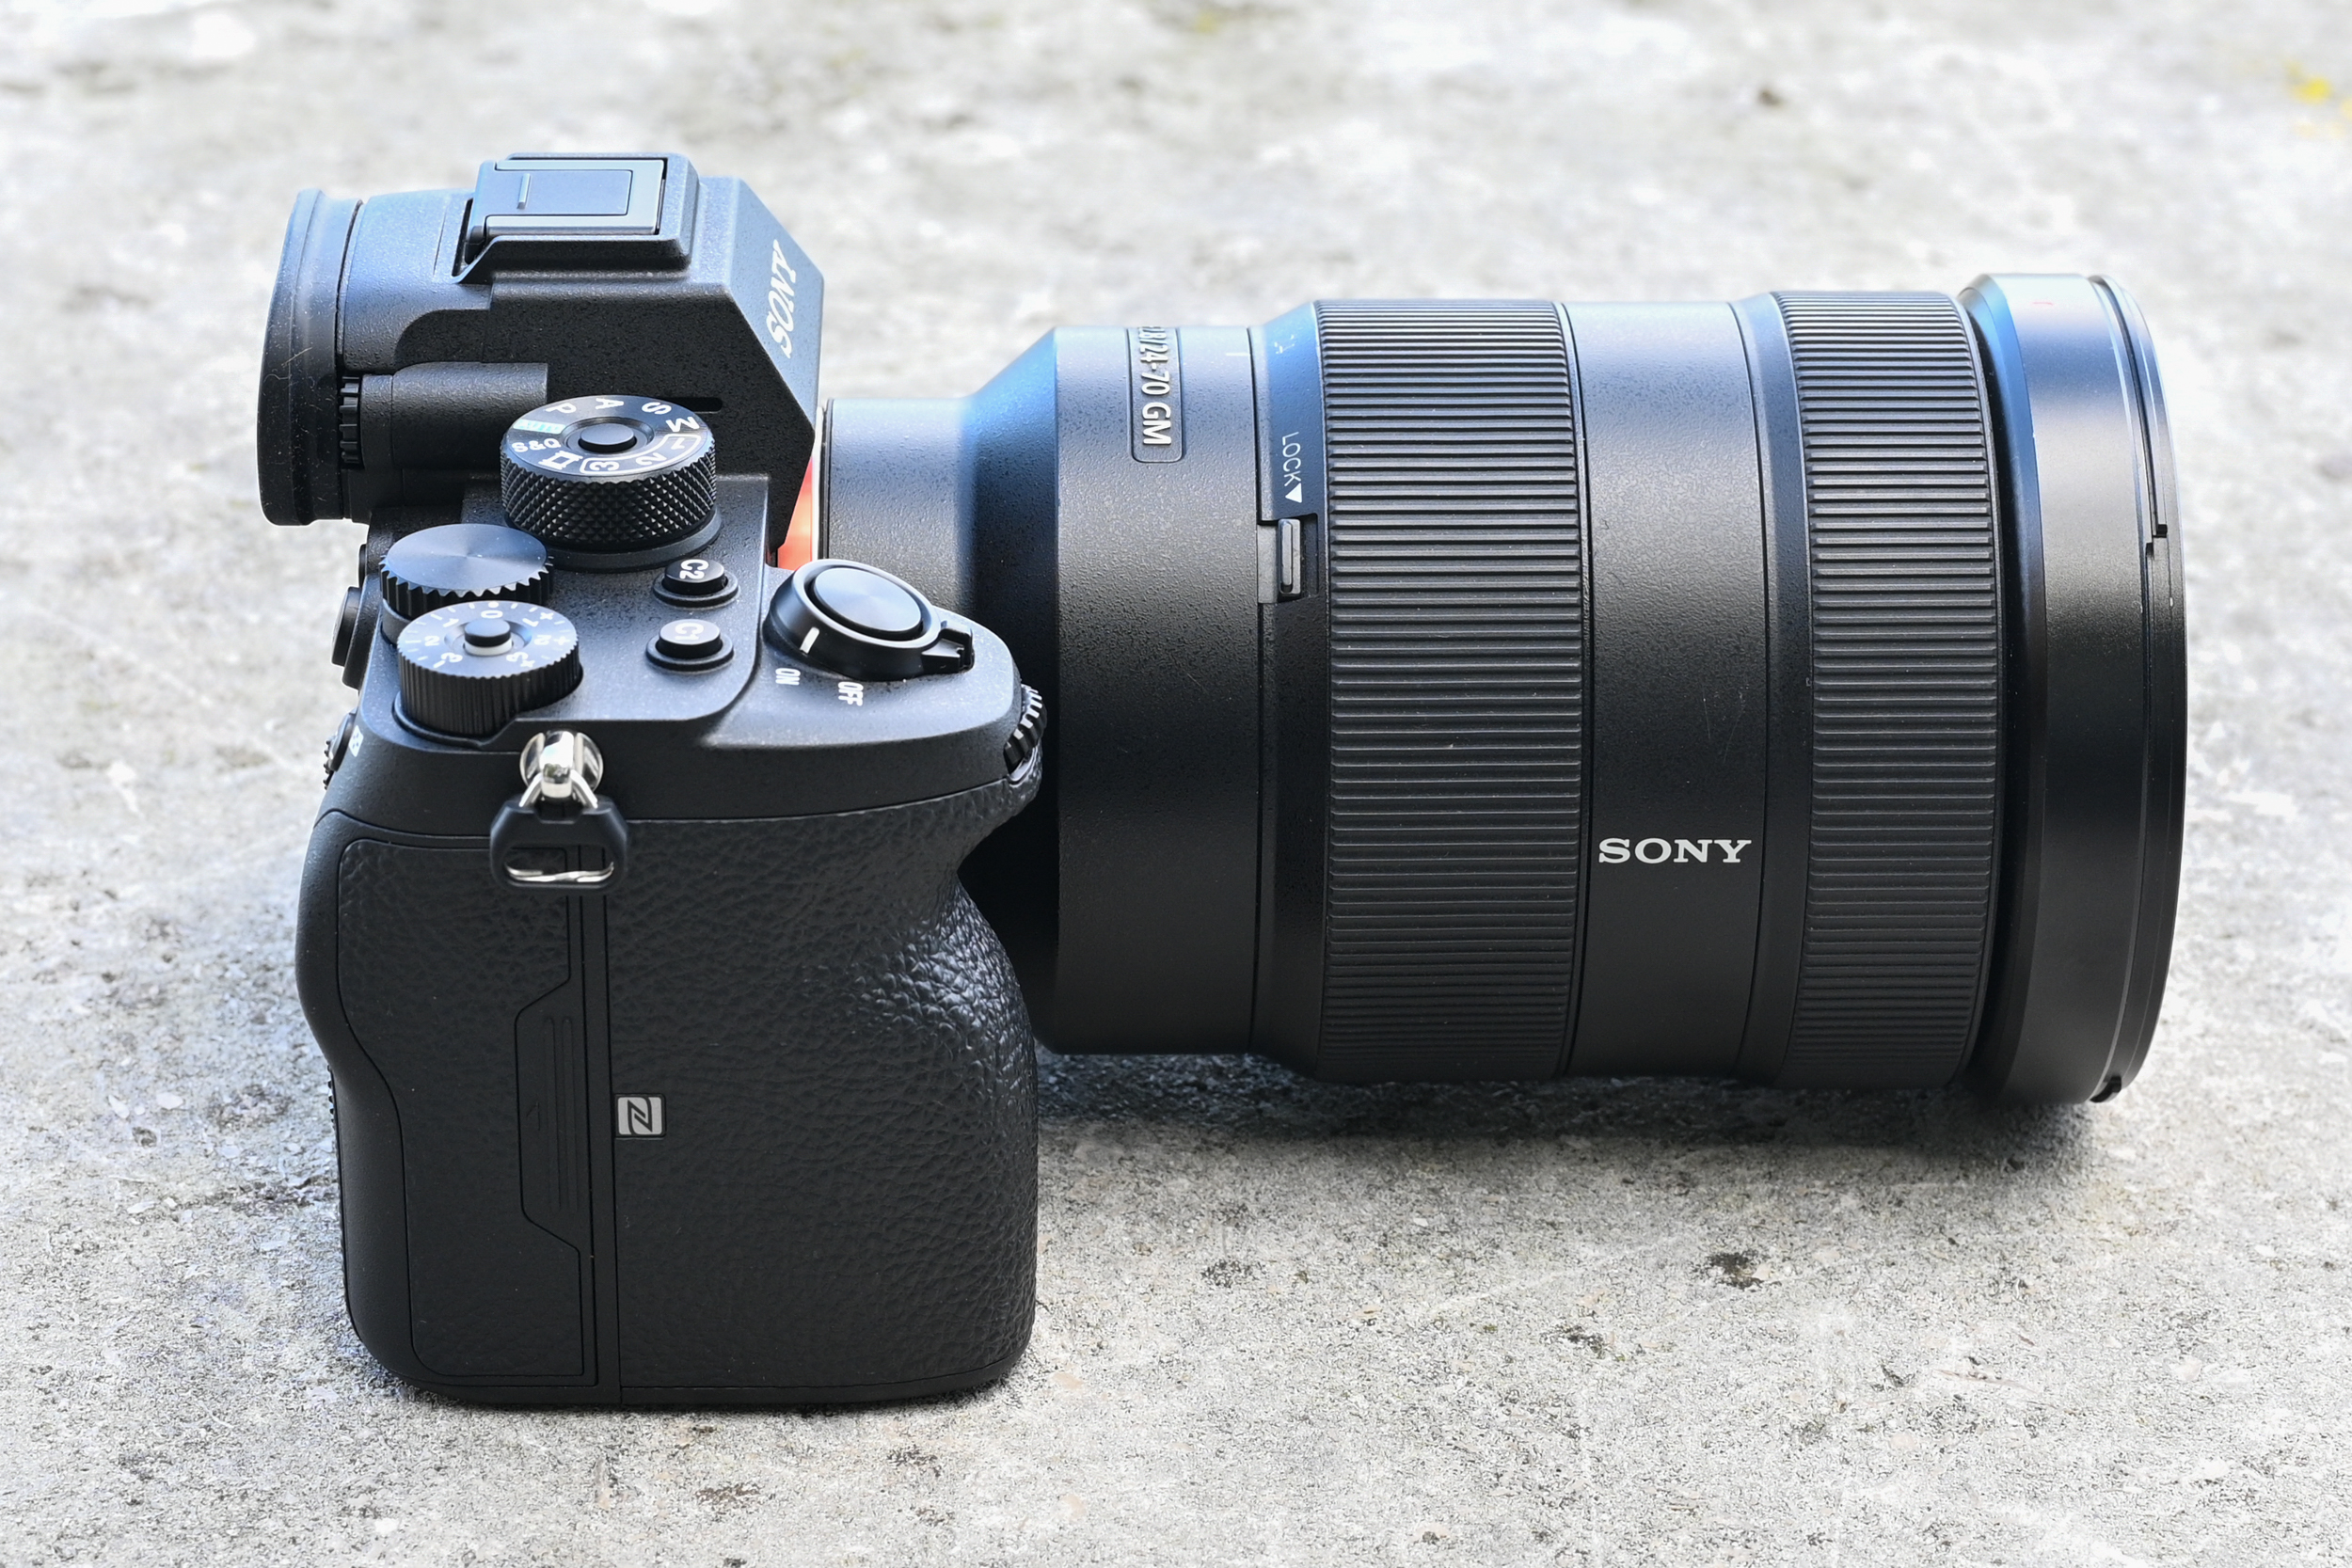 The side of the Sony A7R IV camera